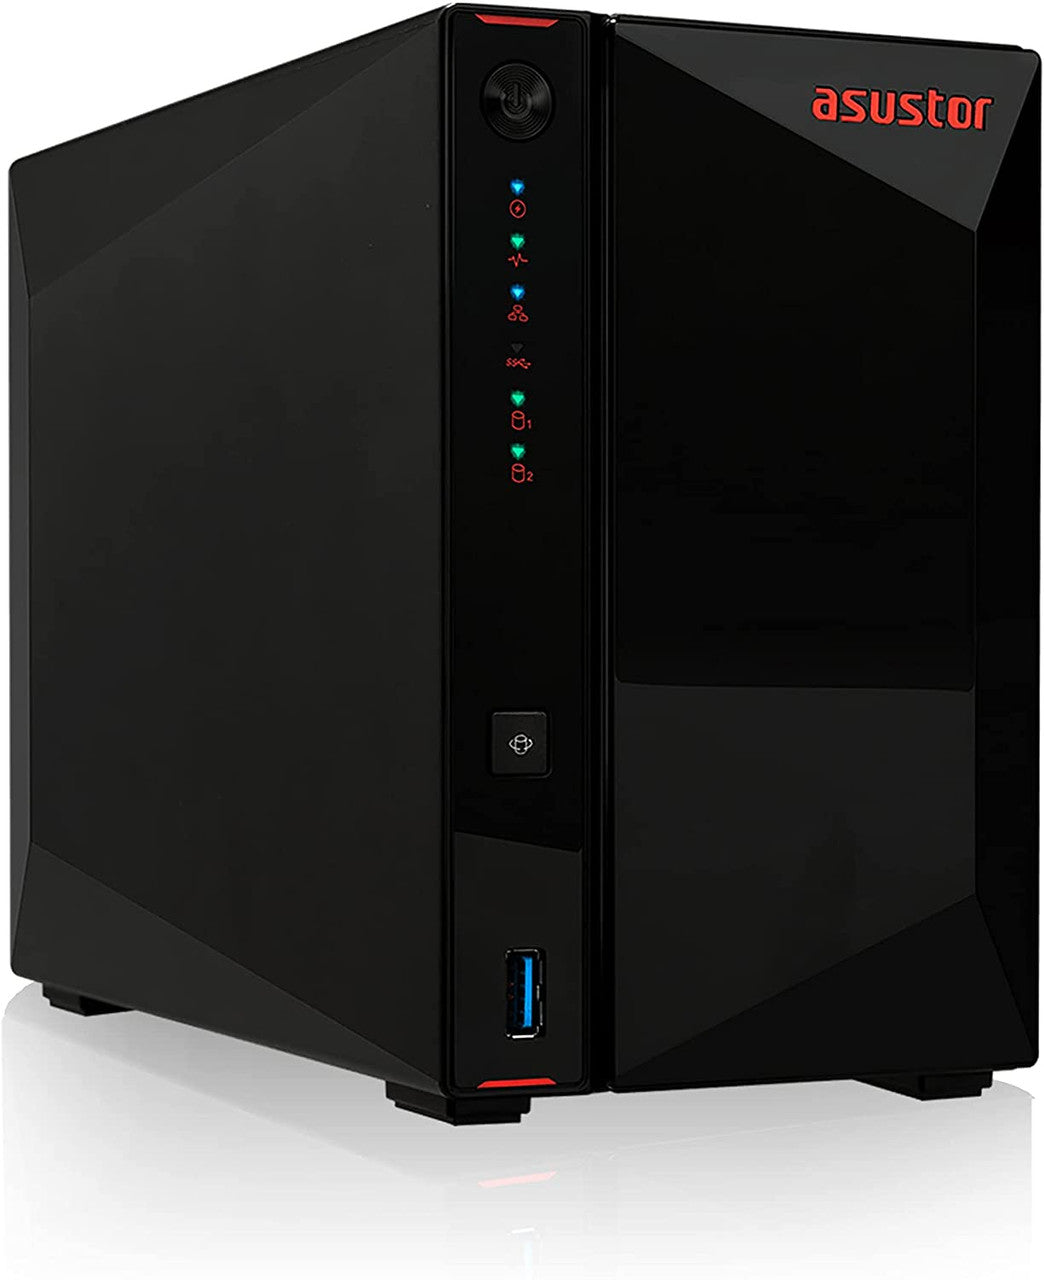 Asustor AS5202T 2-Bay Nimbustor 2 NAS with 8GB RAM and 16TB (2 x 8TB) Western Digital RED Plus Drives Fully Assembled and Tested